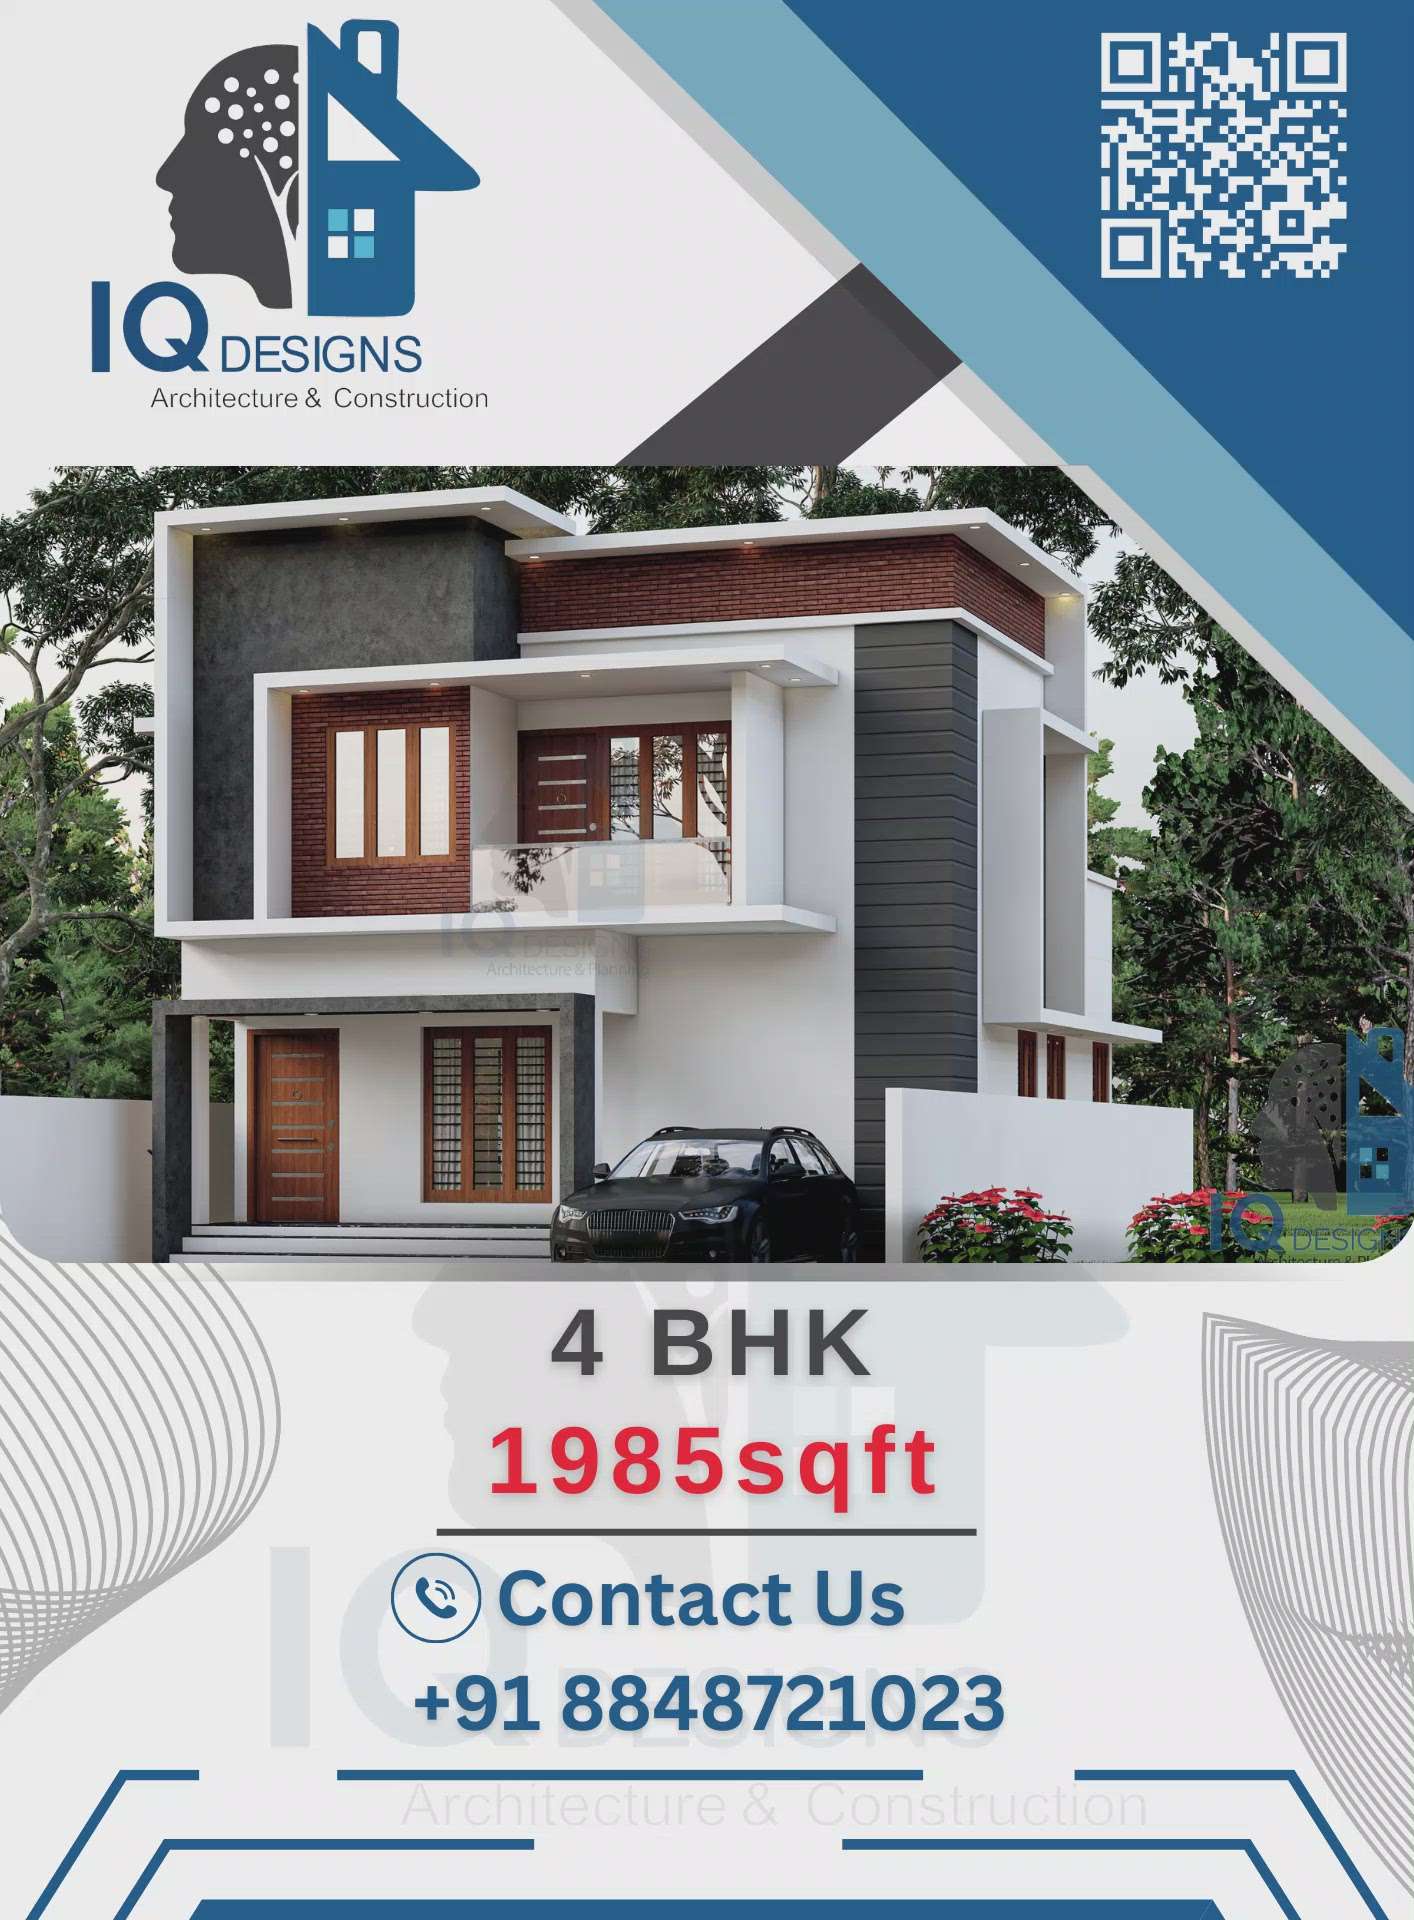 For More Information...
Contact Us +91 8848721023
#trivandrum #construction #home #designs #inetriordesigning #iqdesignshome #iqdesignsconstruction #iqdesignsinterior #tip #tips #informativevideo